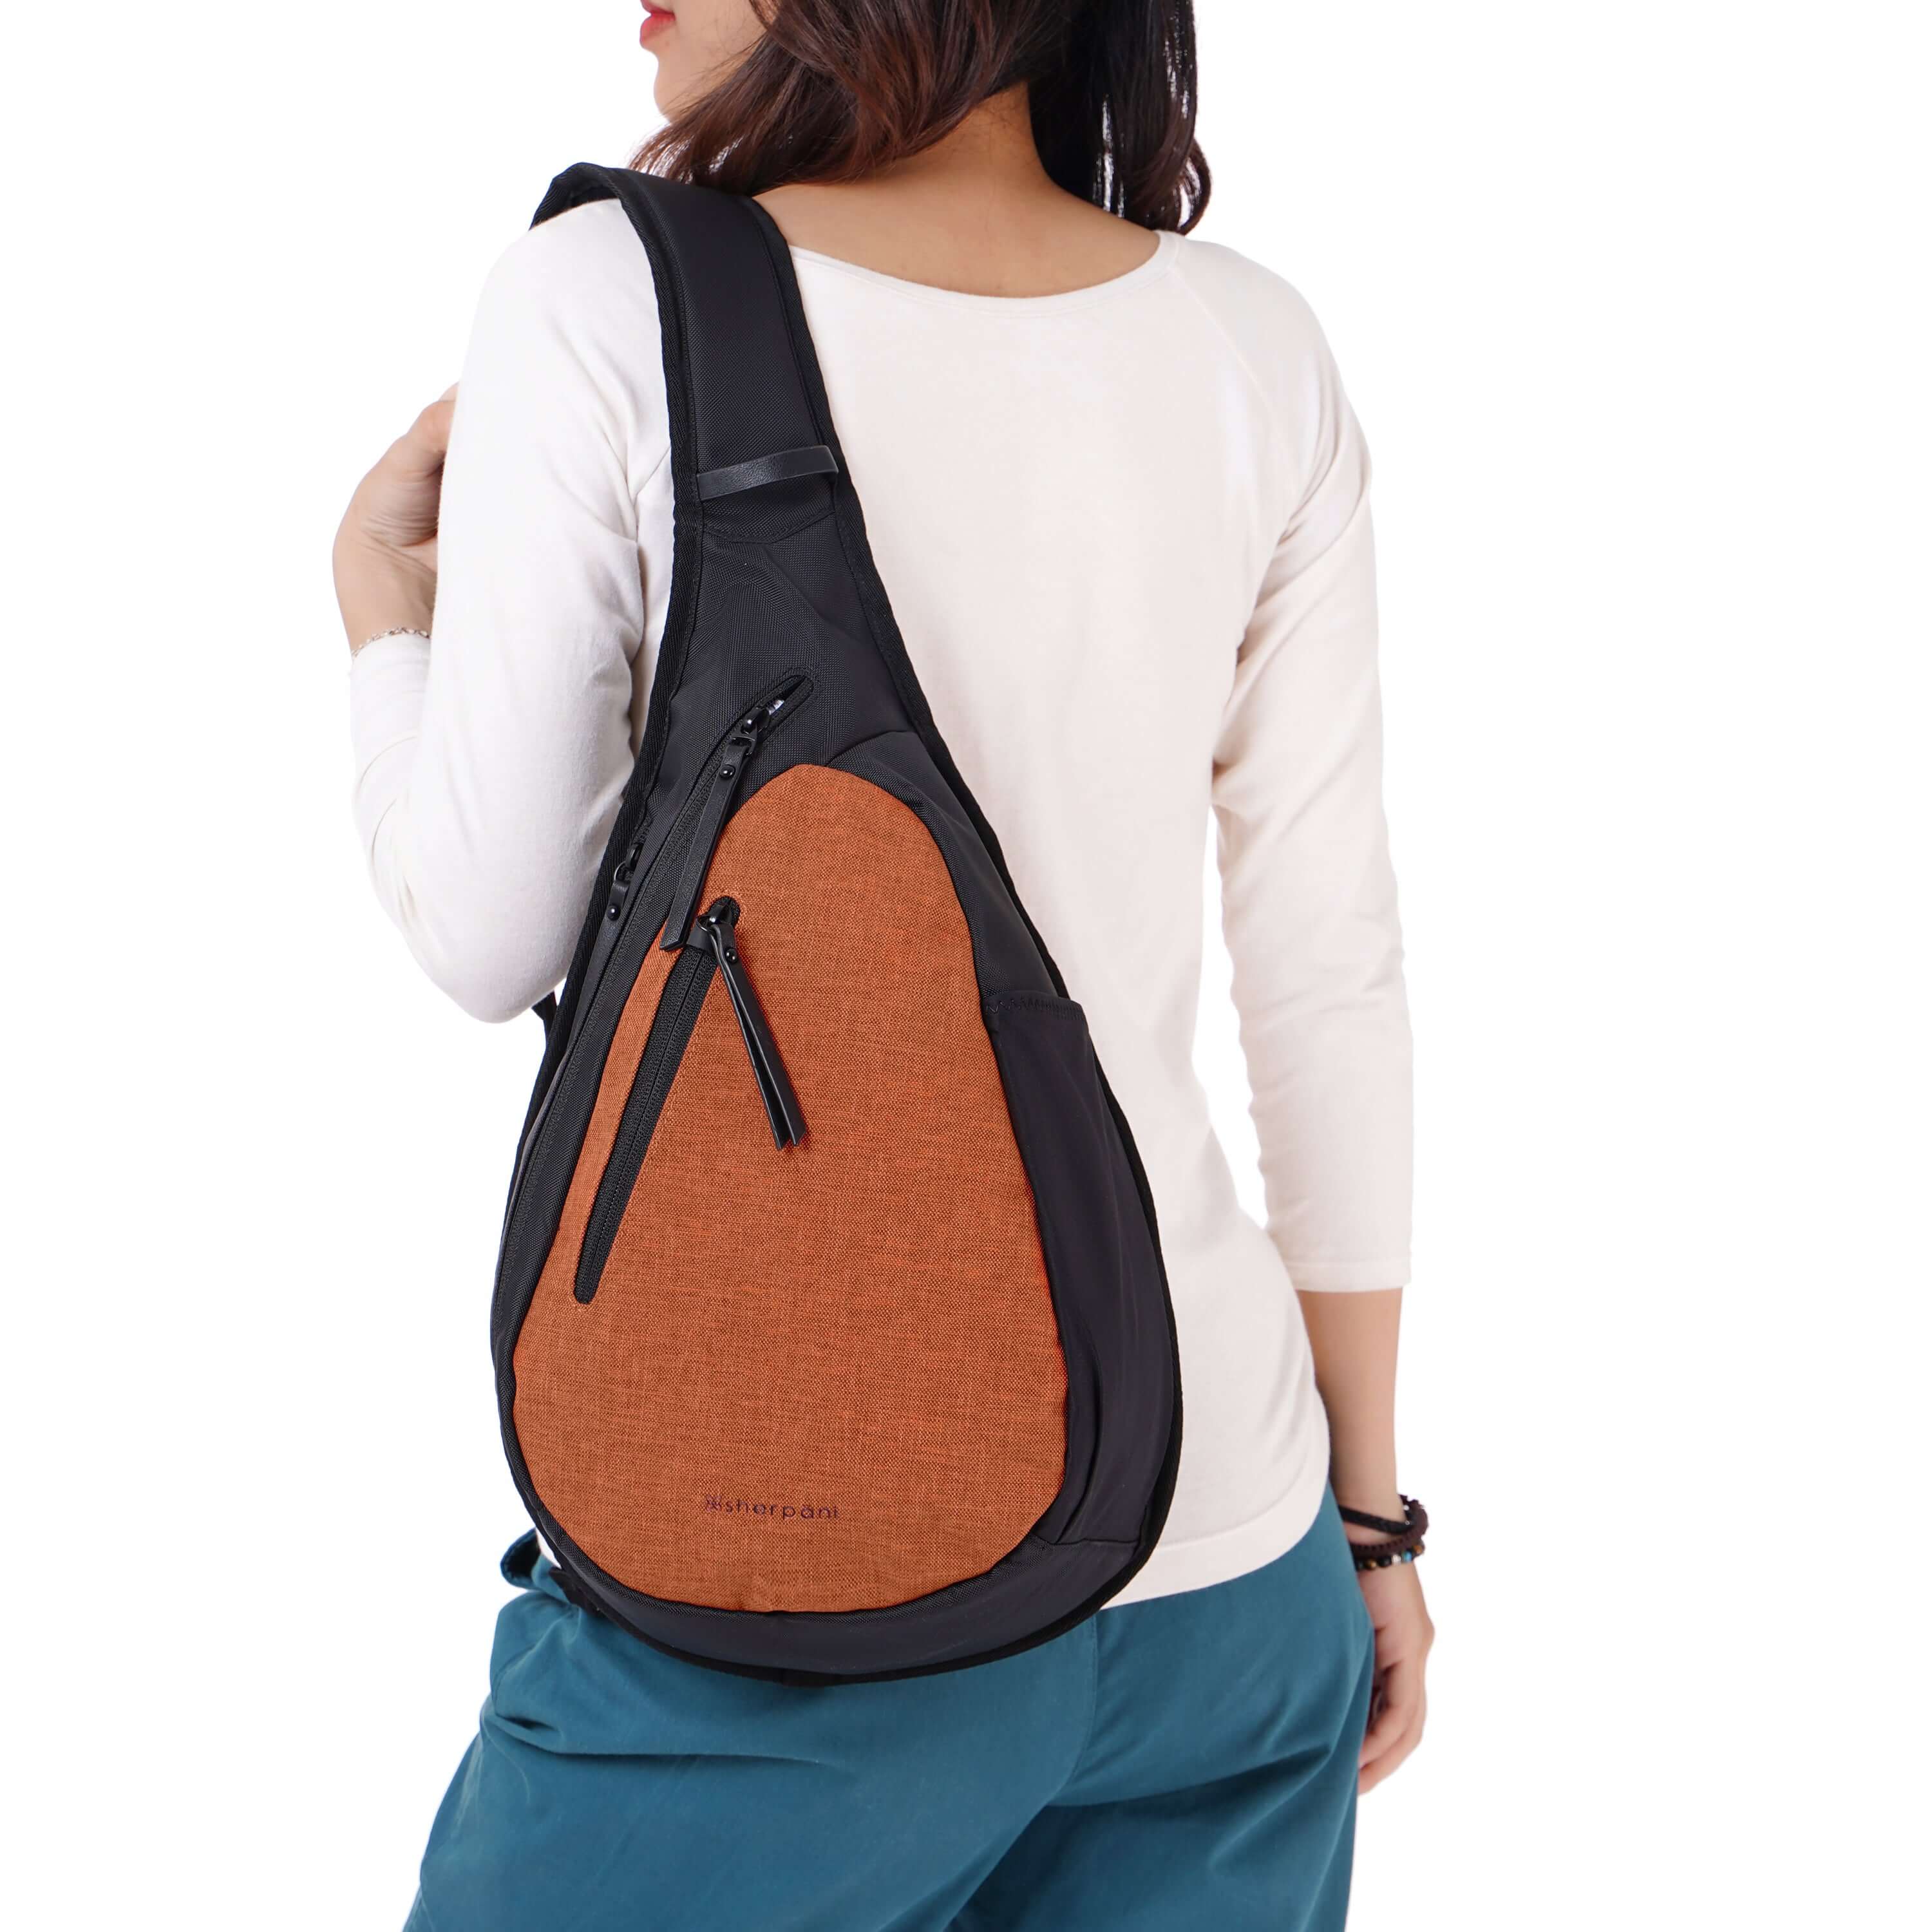 Close up view of a dark haired model facing away from the camera. She is wearing a white shirt, blue pants and Sherpani’s Anti-Theft bag, the Esprit AT in Copper, over her shoulder.